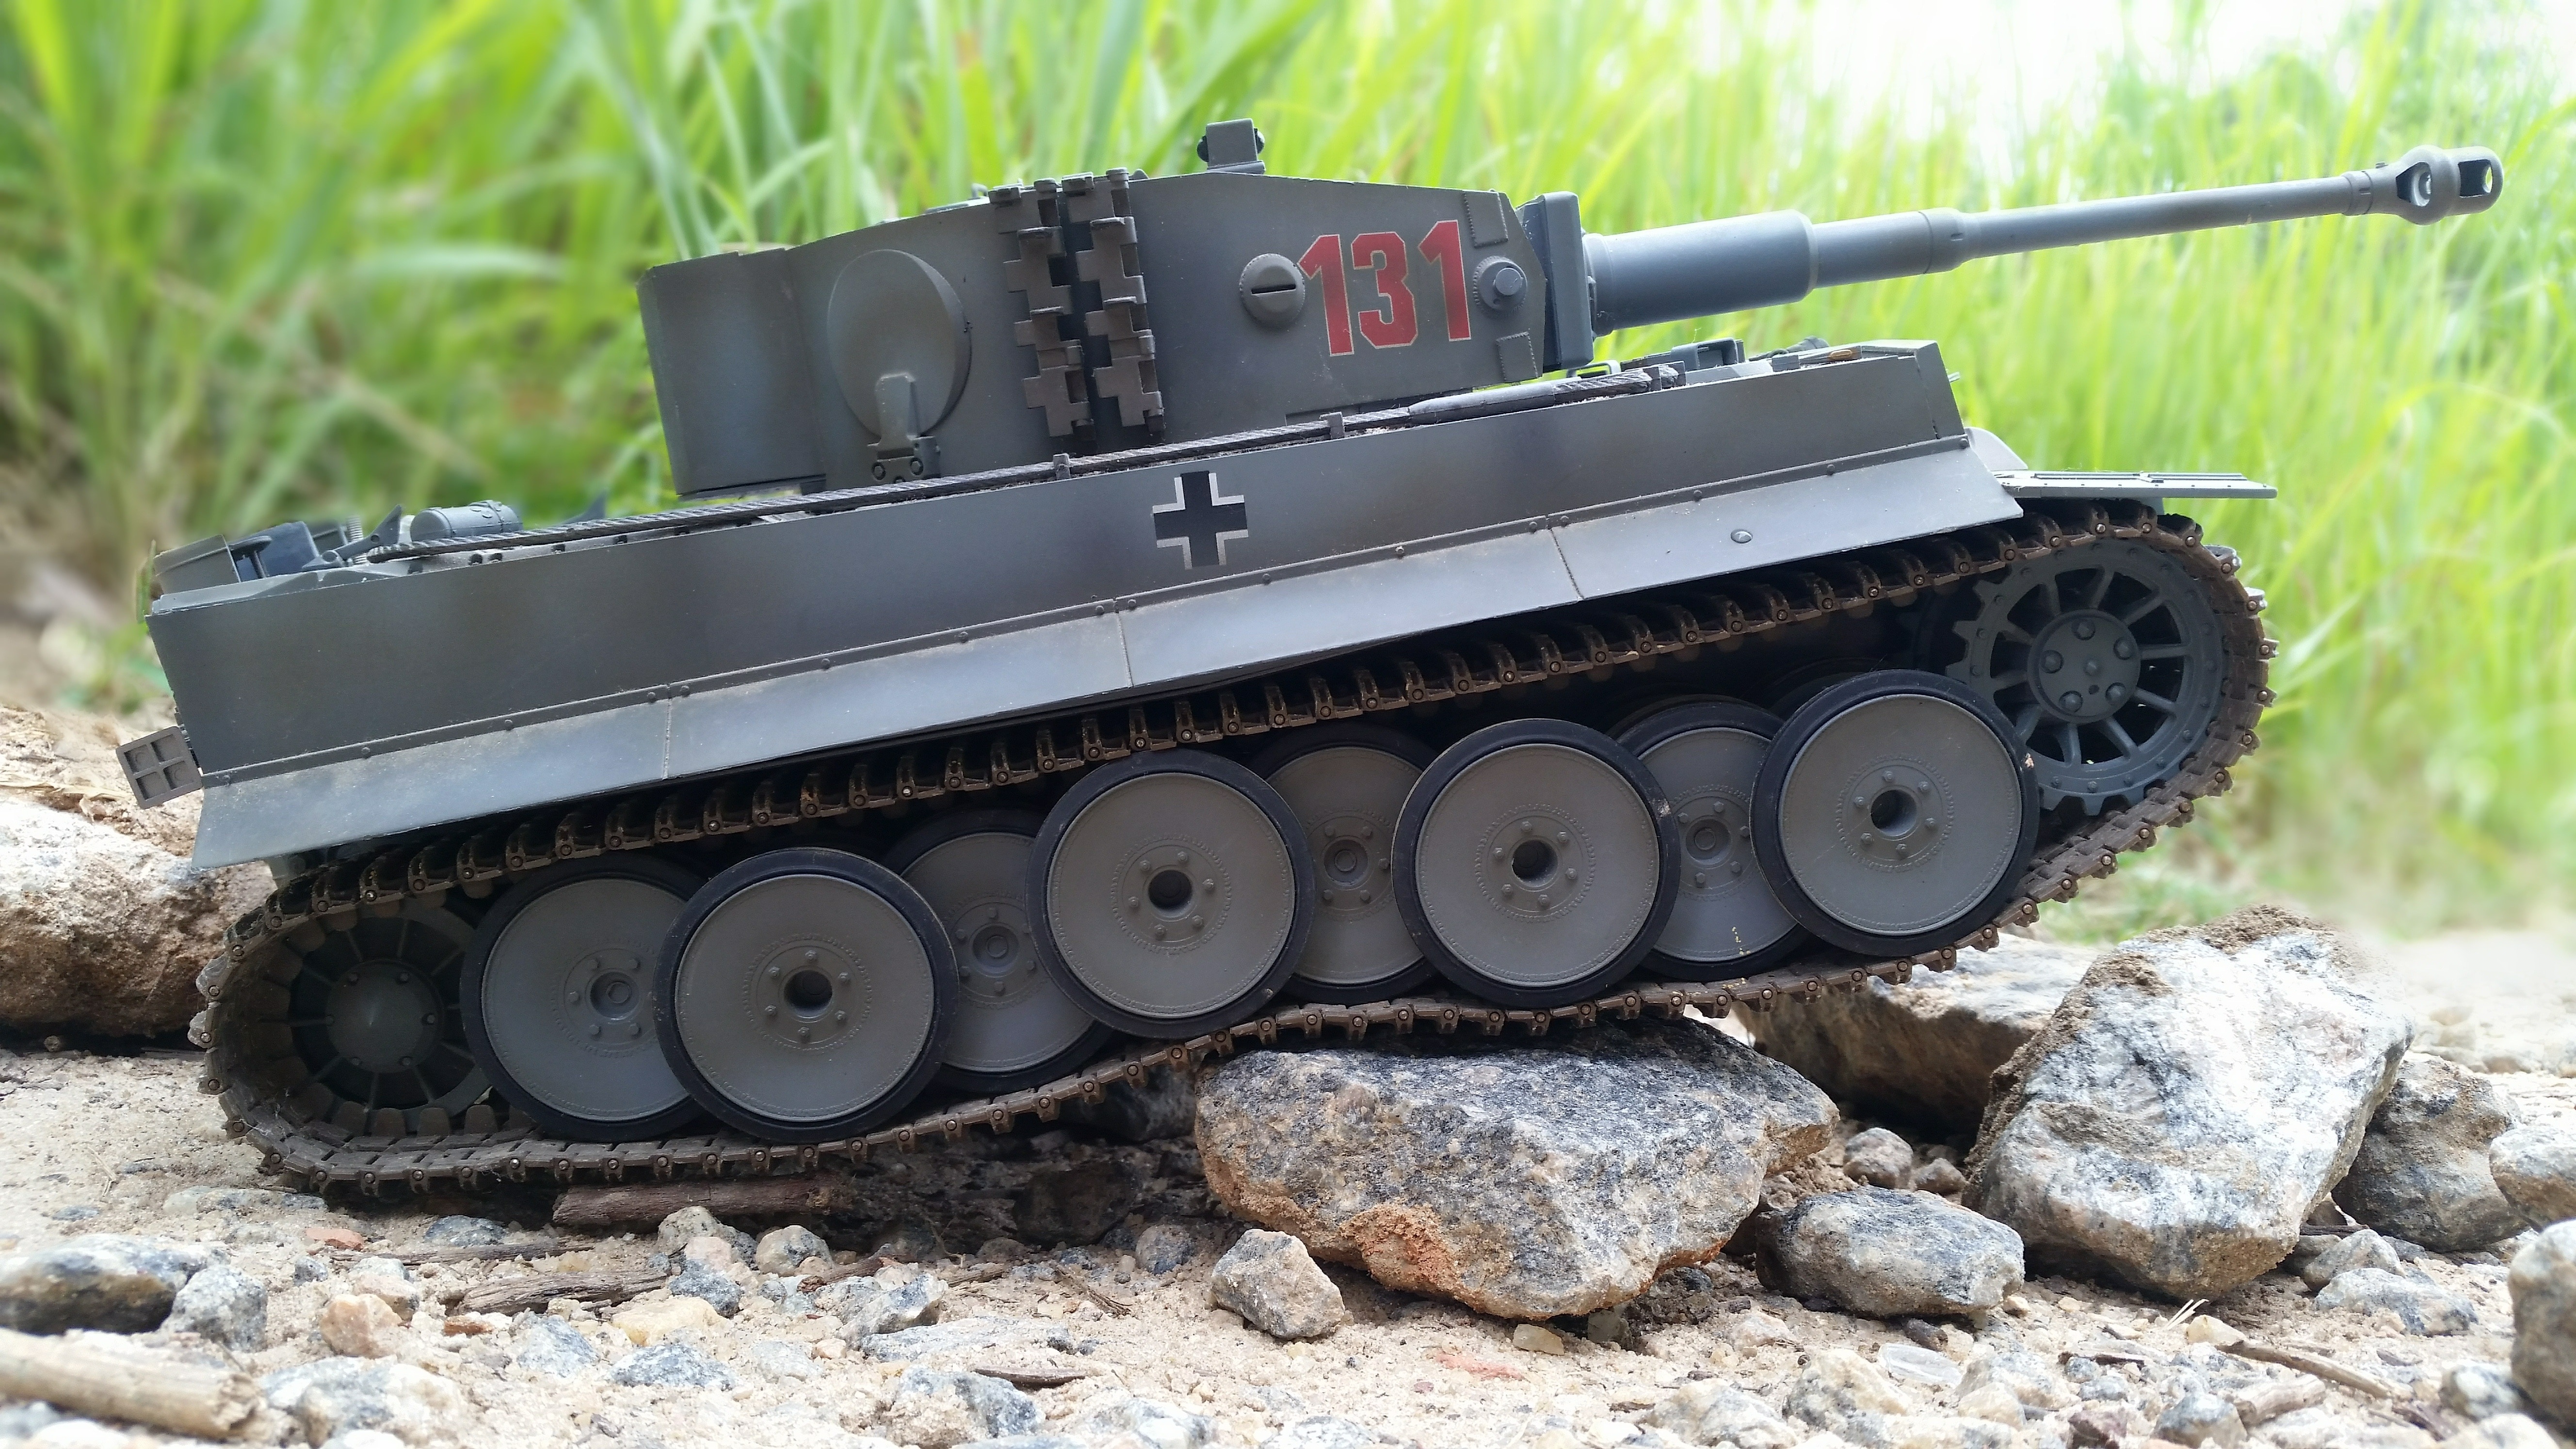 War, Toy, Military, Army, Tank, industry, outdoors